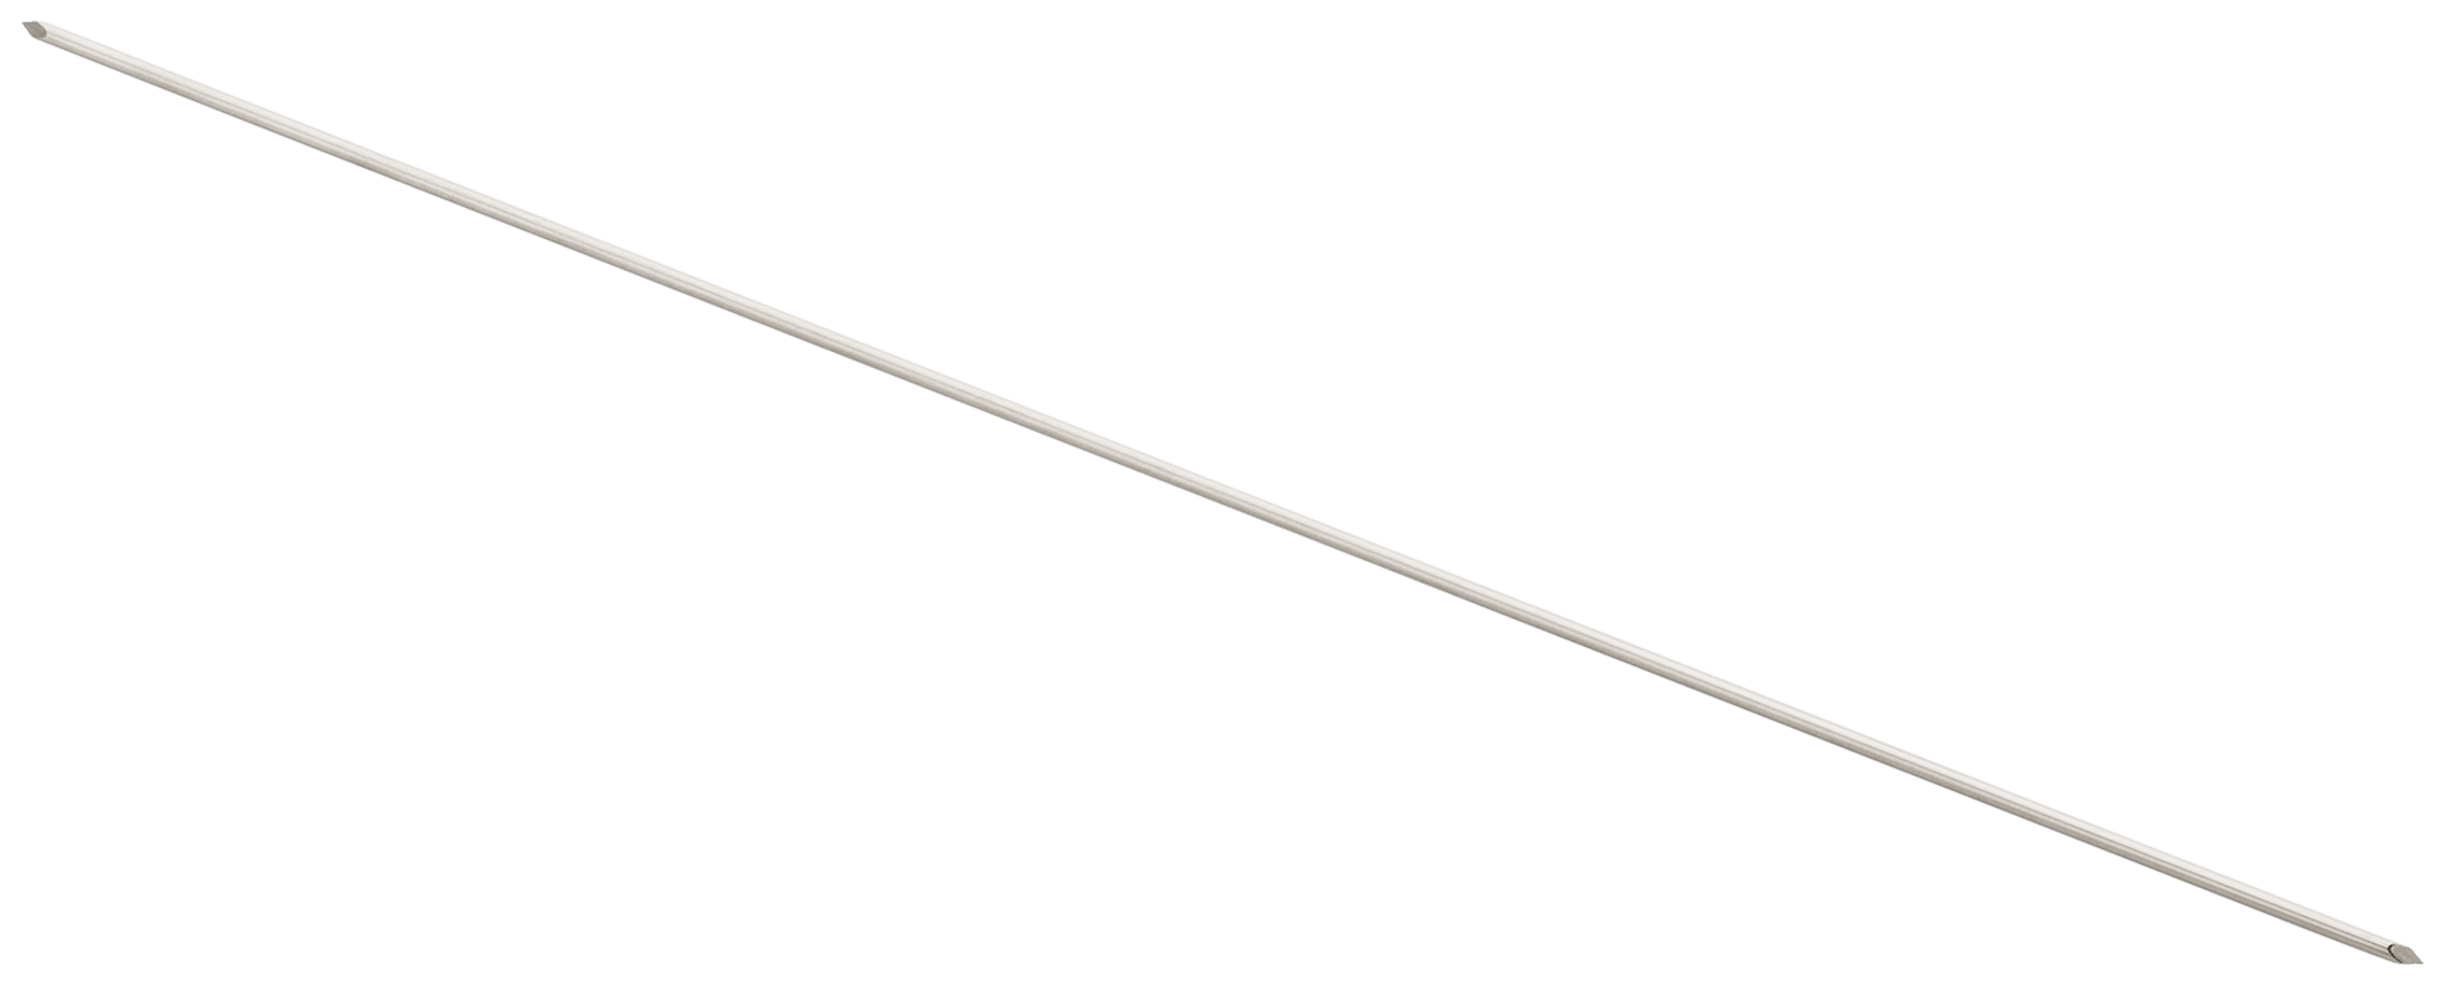 Nitinol Guidewire with Double Trocar Tip, .045" x 5.91" (1.1 mm x 150 mm)